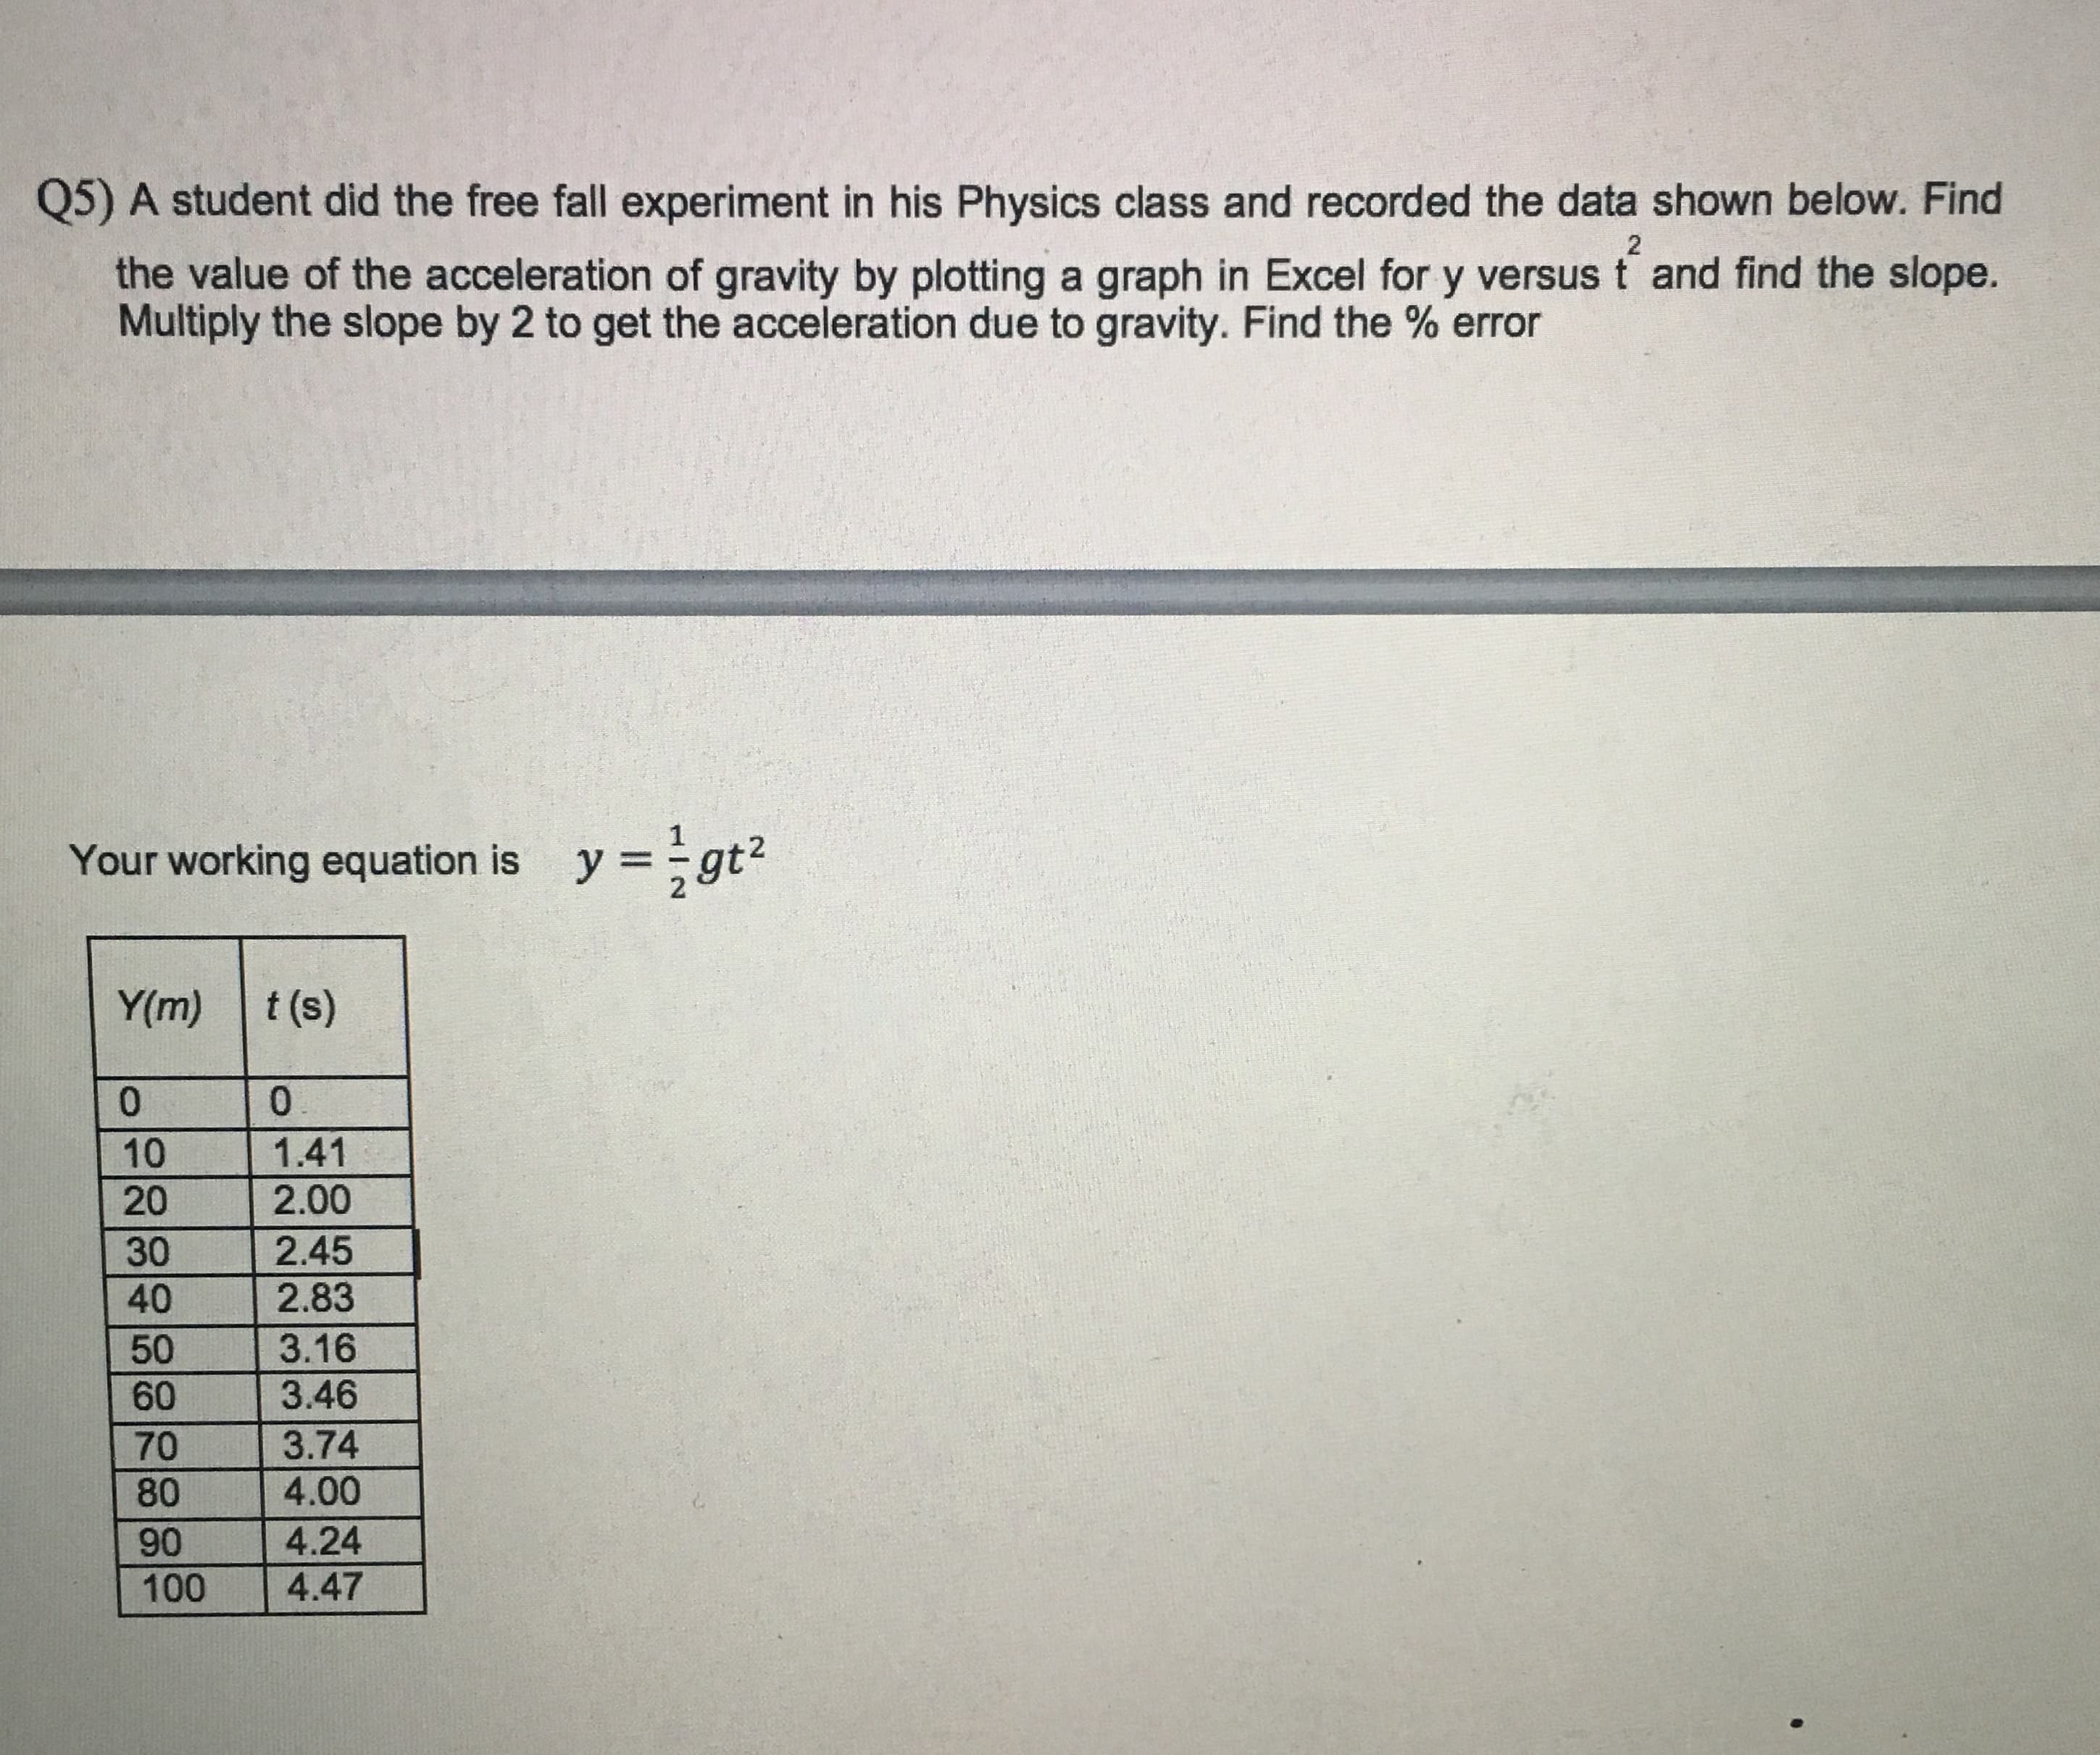 A student did the free fall experiment in his Physics class and recorded the data shown below. Find
the value of the acceleration of gravity by plotting a graph in Excel for y versus t and find the slope.
Multiply the slope by 2 to get the acceleration due to gravity. Find the % error
